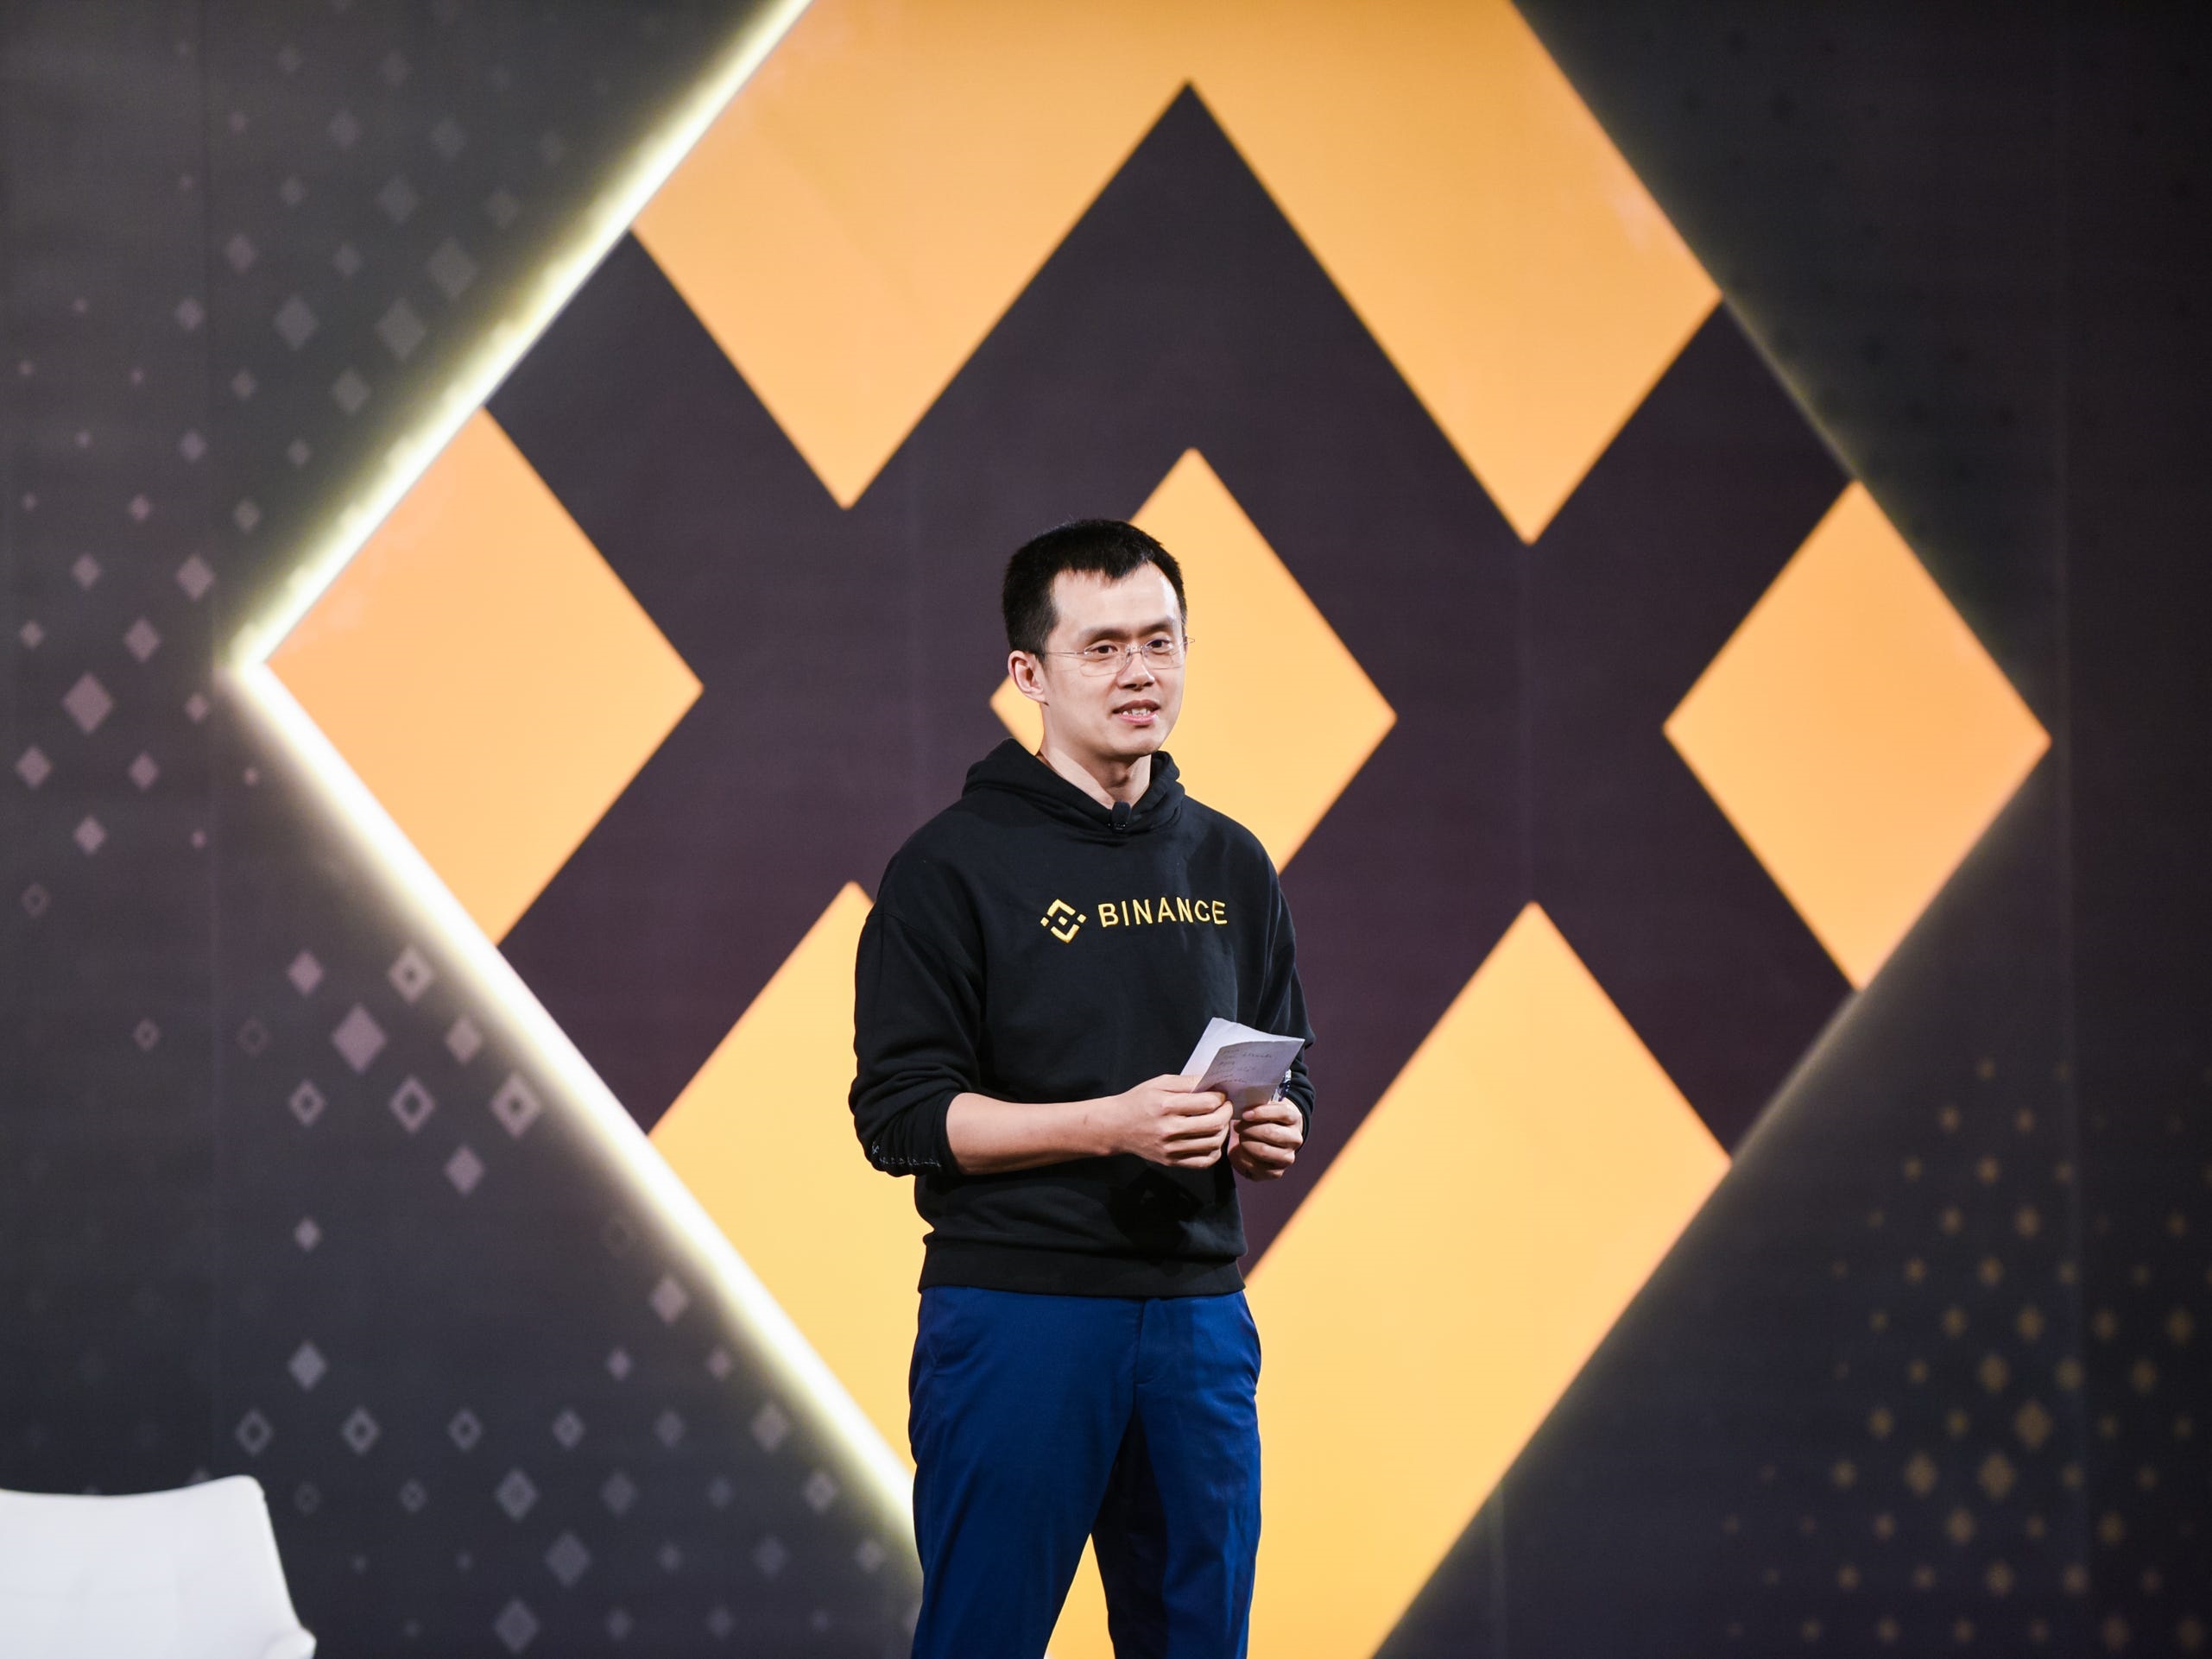 Binance is accused of evading the law by ignoring anti-money laundering regulations